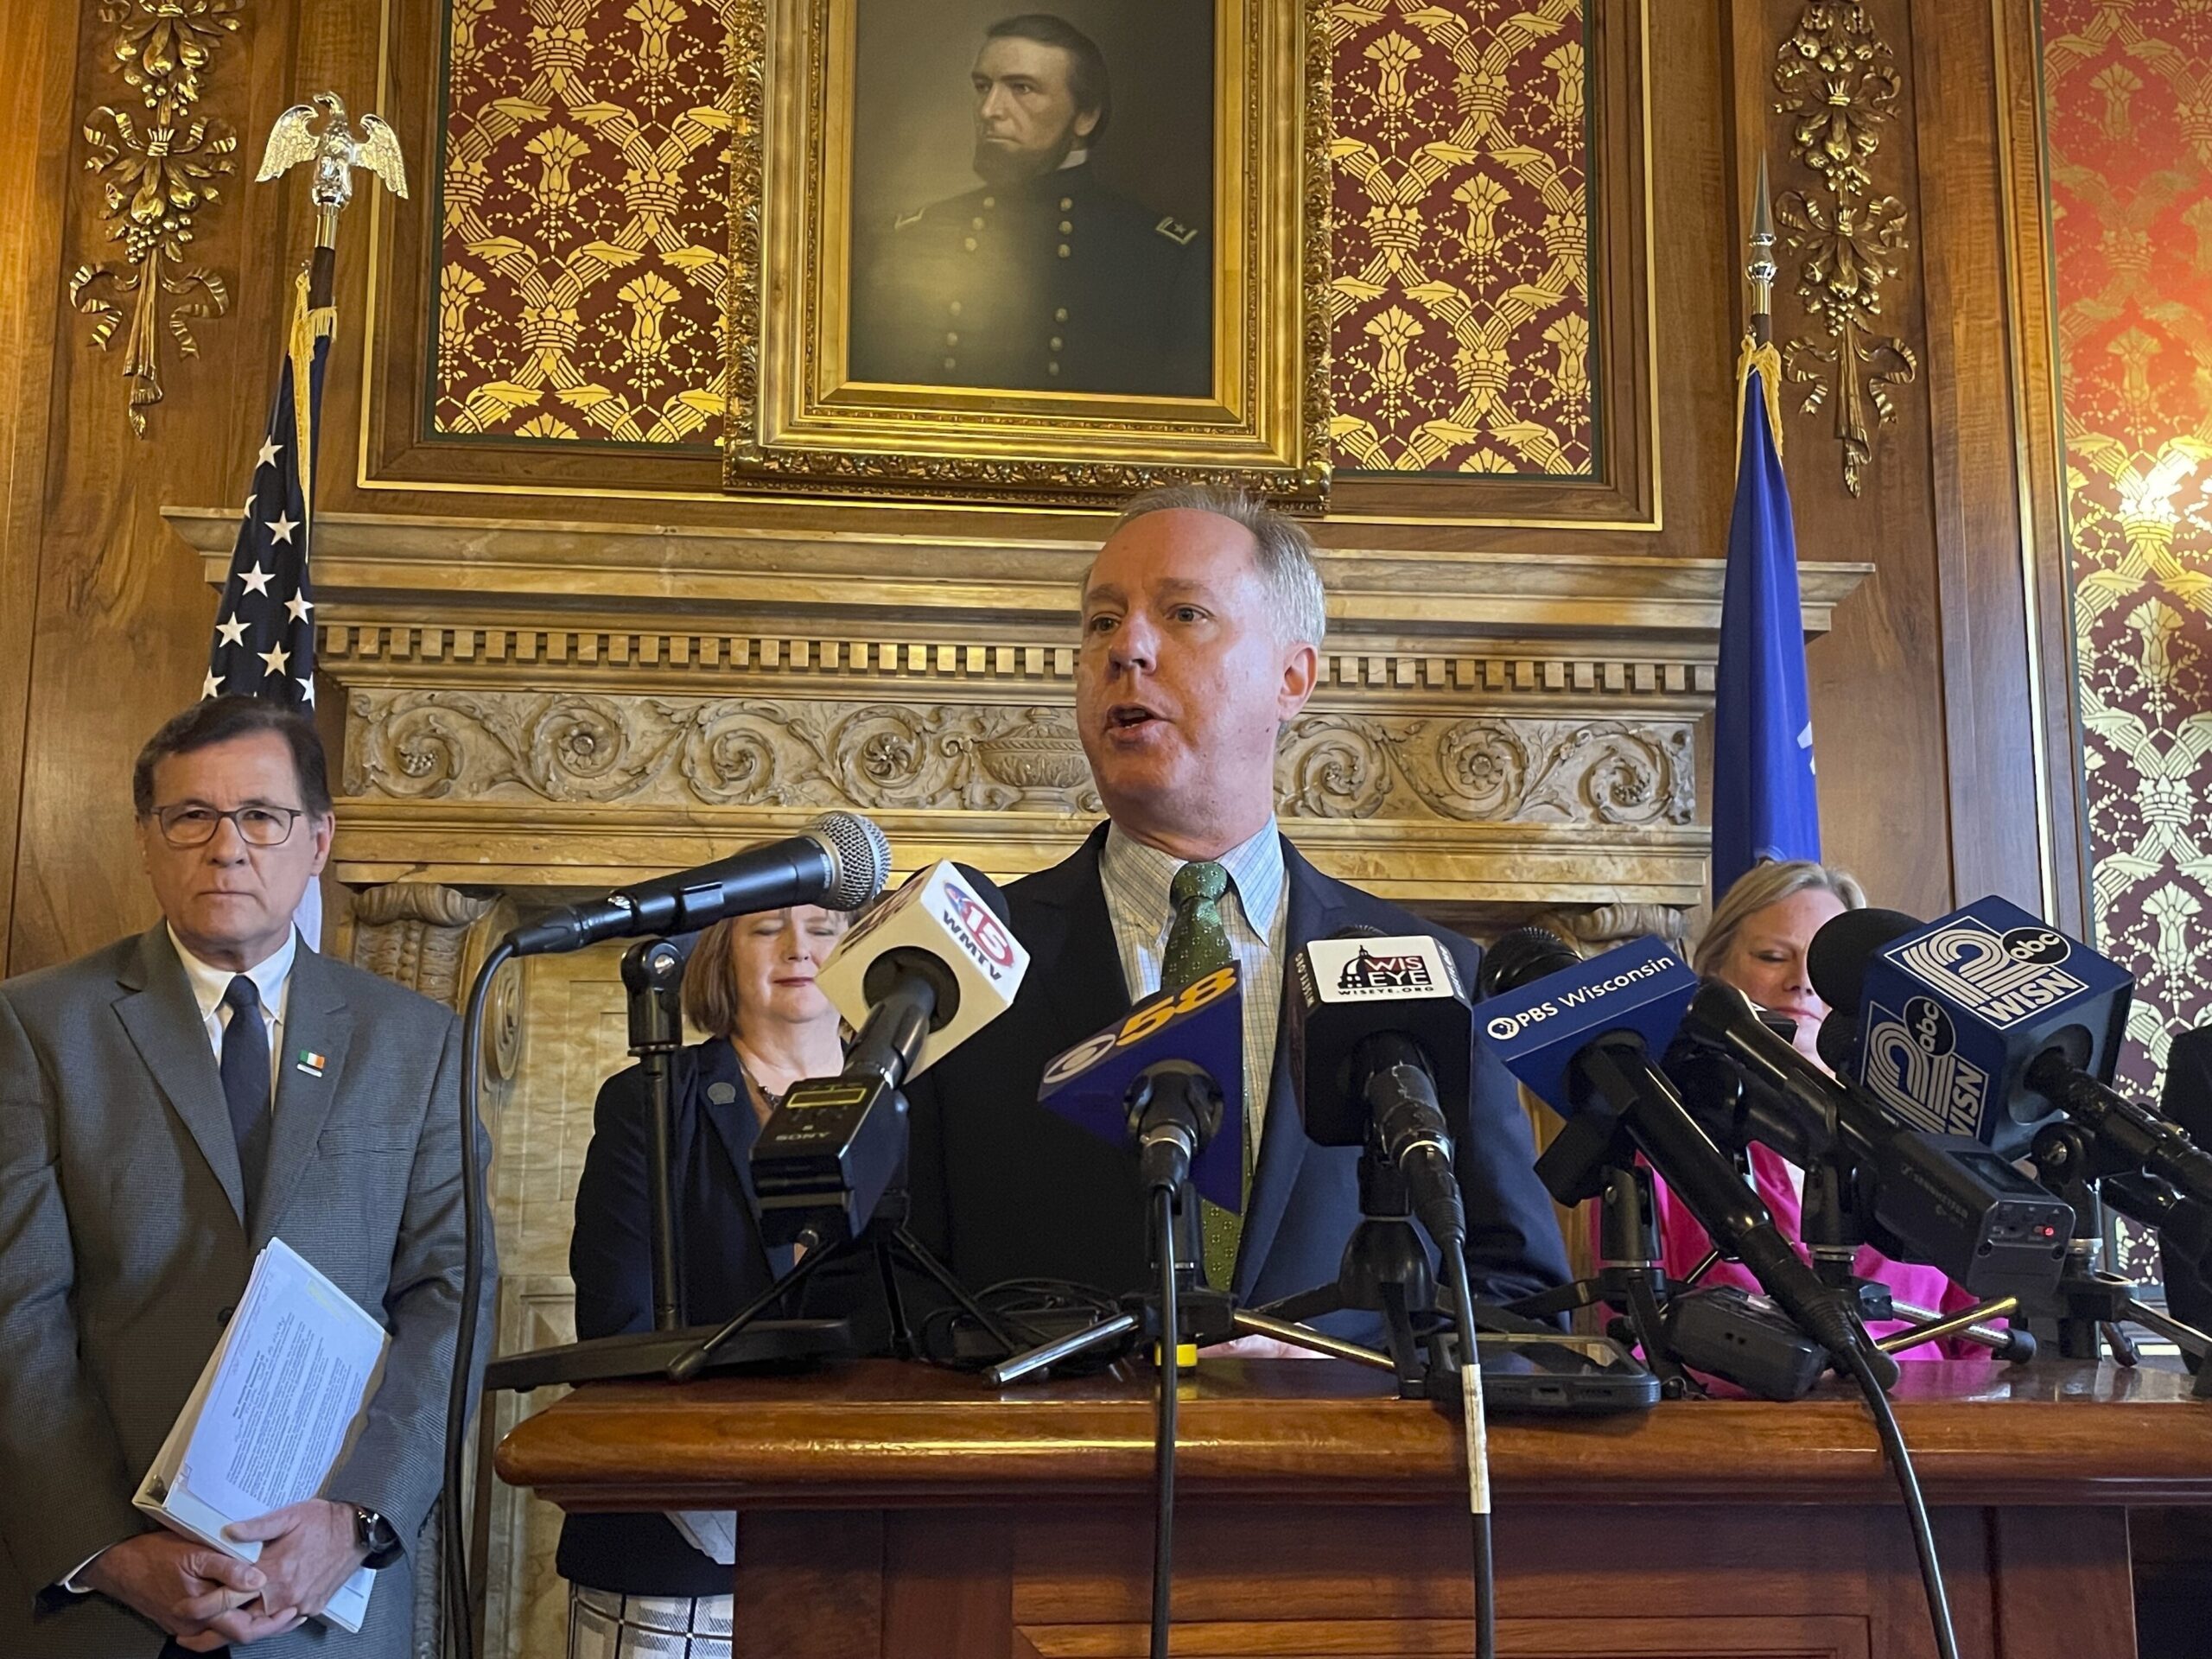 Wisconsin Assembly Speaker Robin Vos standing at a podium during a new conference with people behind him